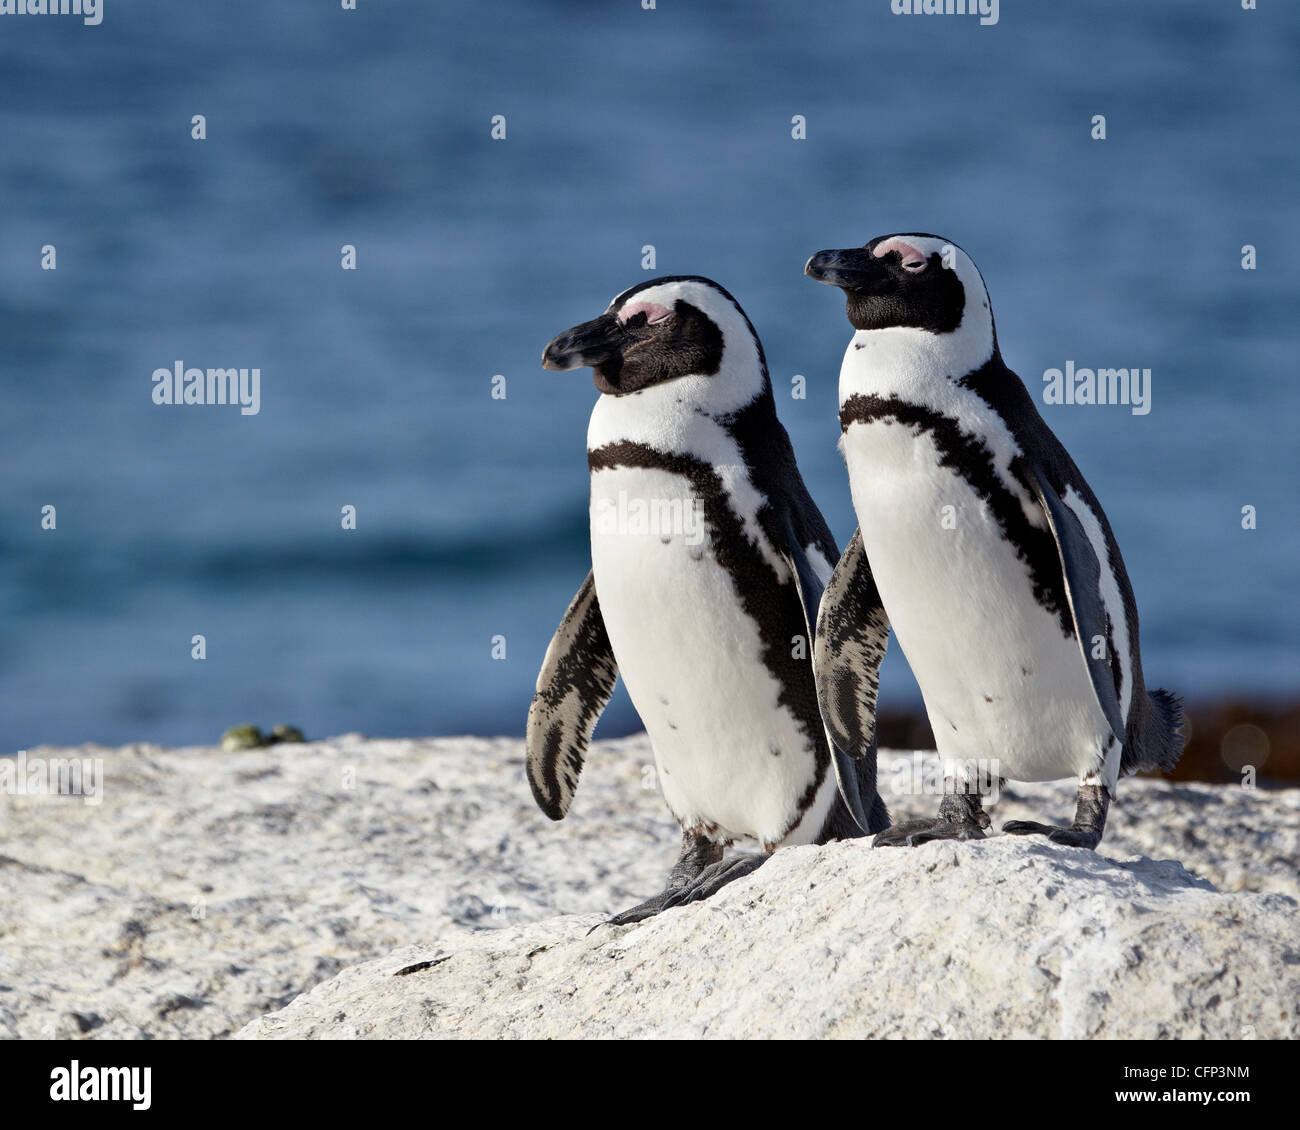 Two African penguins (Spheniscus demersus), Simon's Town, South Africa, Africa Stock Photo